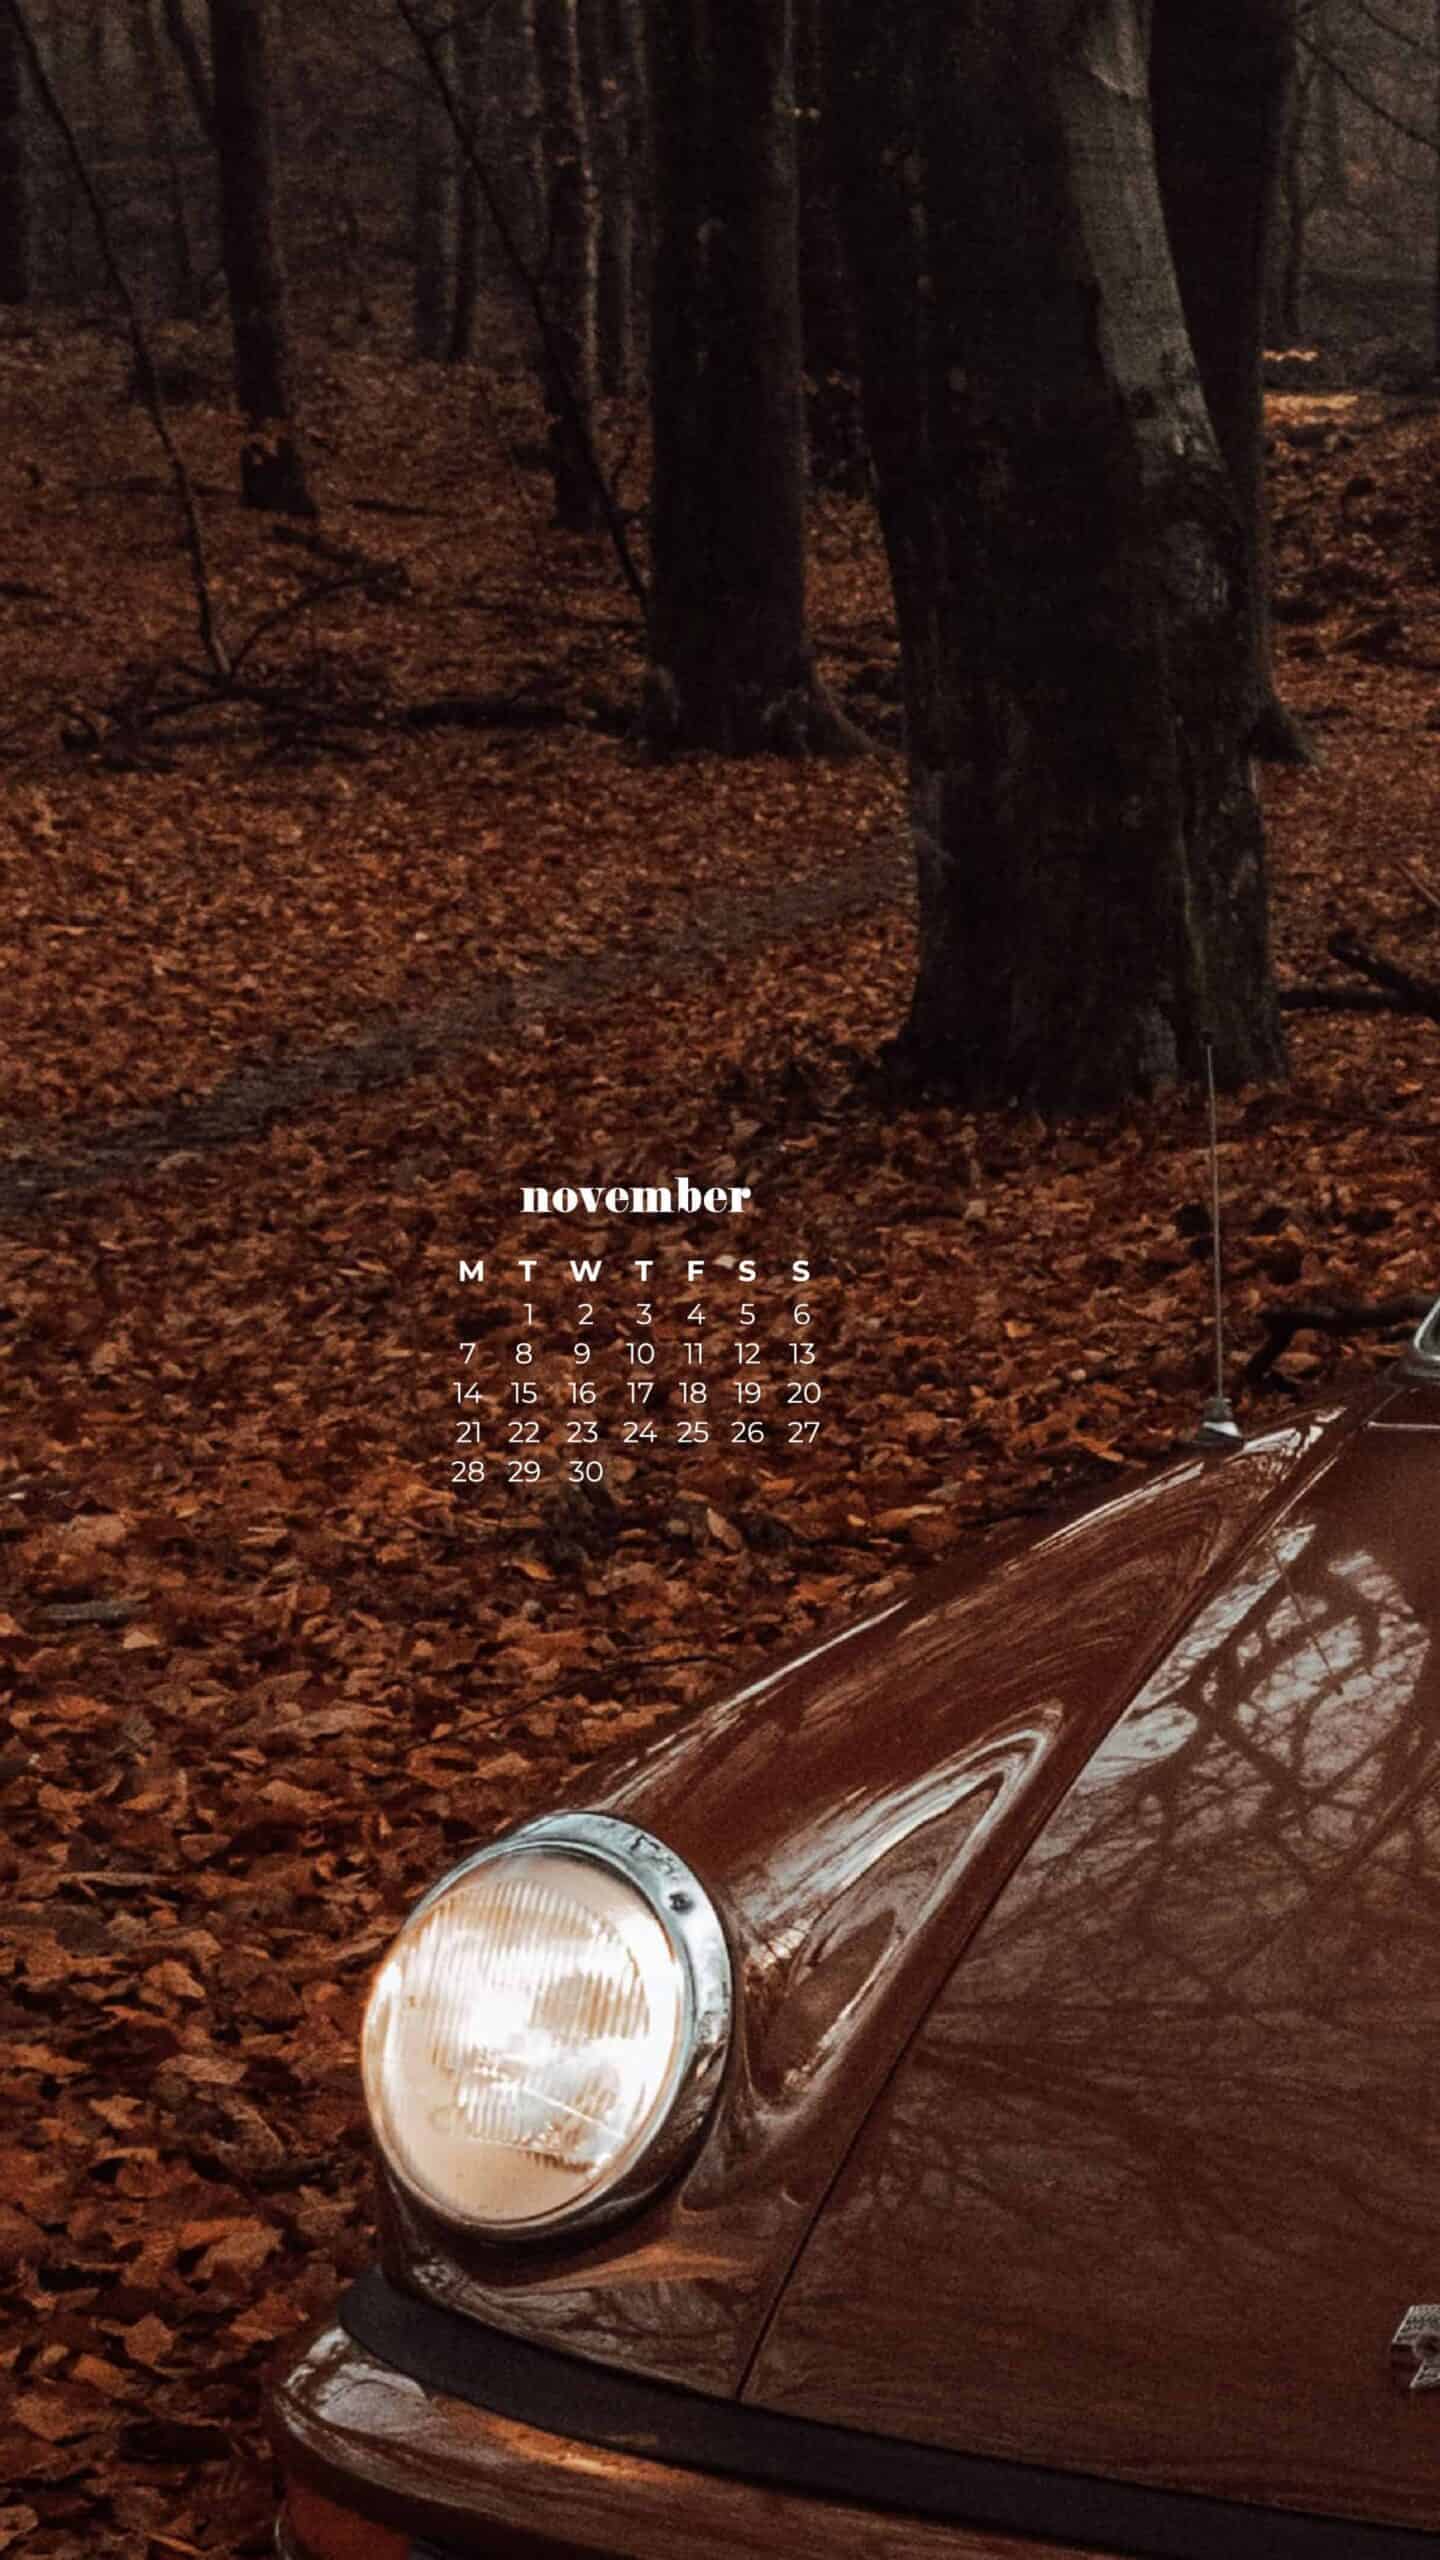 vintage rust colored porche car in a forest with matching colored leaves on ground - monochromatic autumn fall shot November 2022 wallpapers – FREE calendars in Sunday & Monday starts + no-calendar designs. 59 beautiful options for desktop & smart phones!